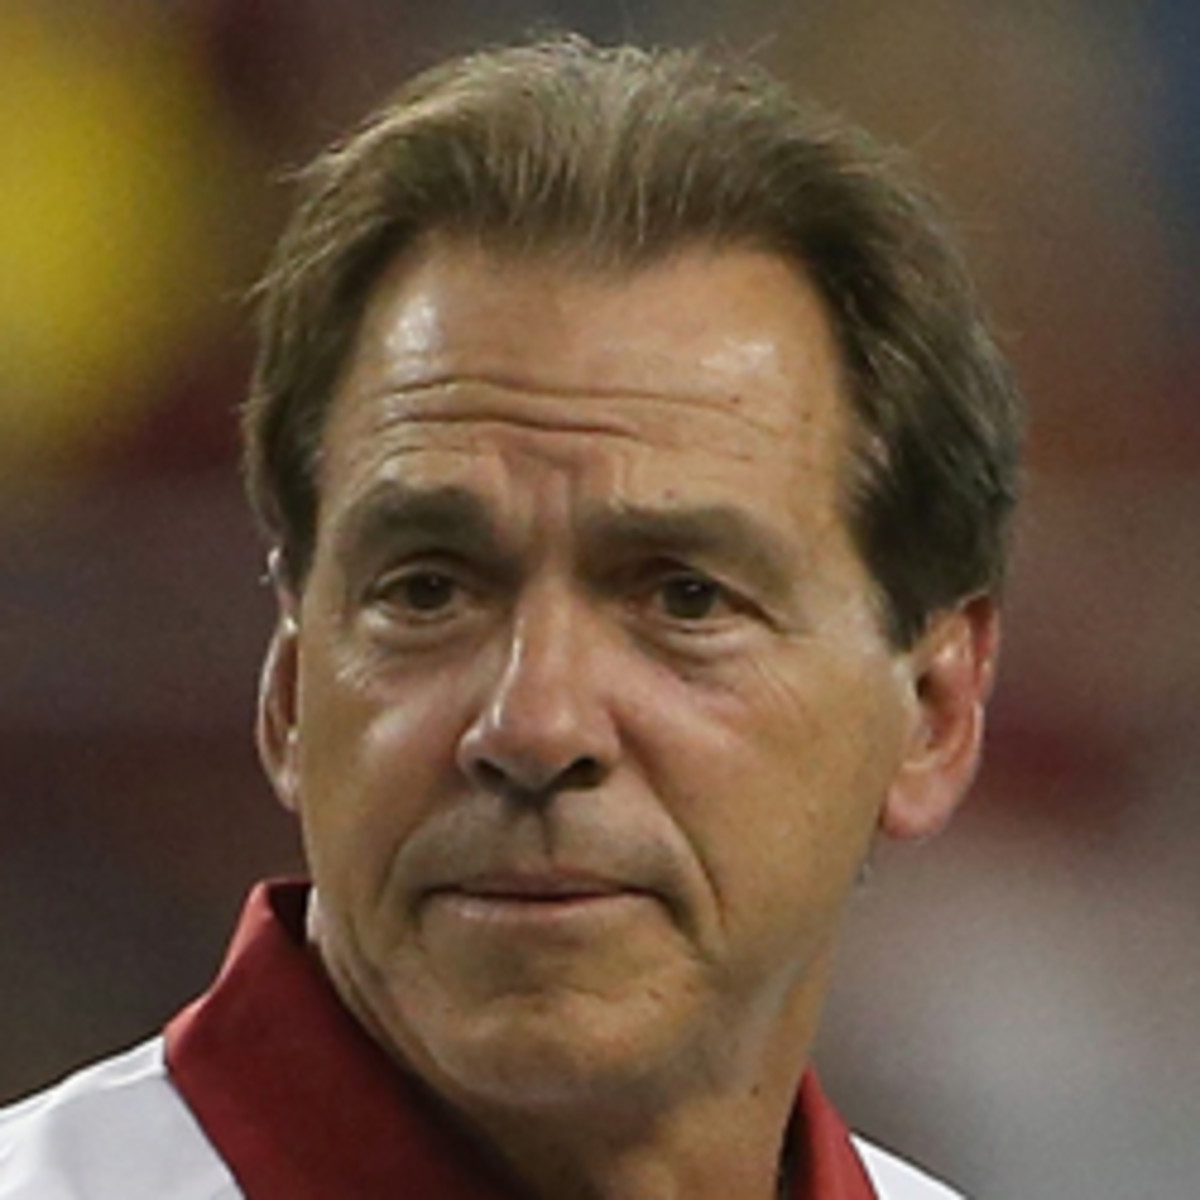 Nick Saban was the Browns' defensive coordinator under Bill Belichick in the early 90's. (Leon Halip/Getty Images)